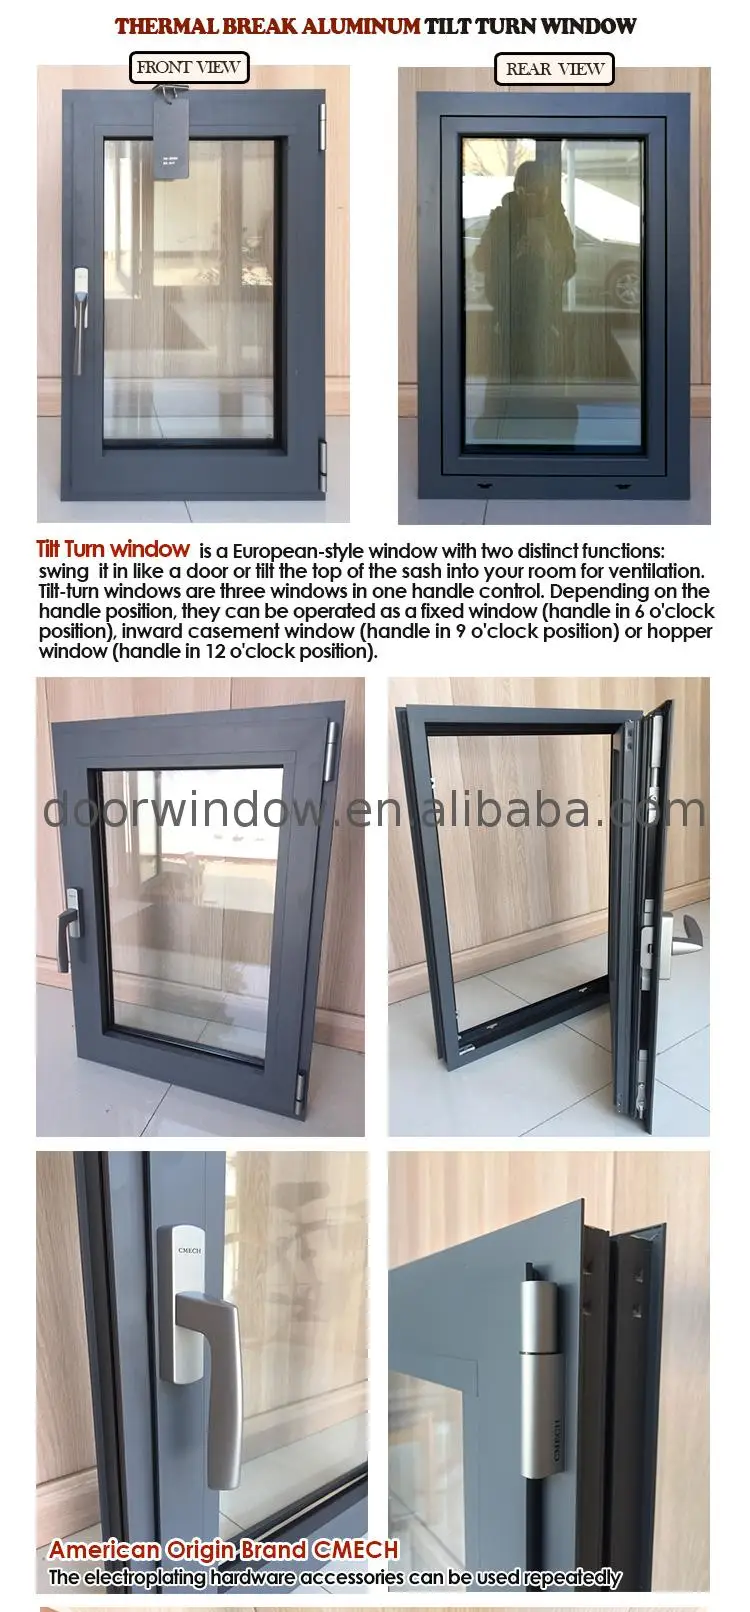 Aluminium casement windows and doors with in swing panes as certificates window sub frame top head